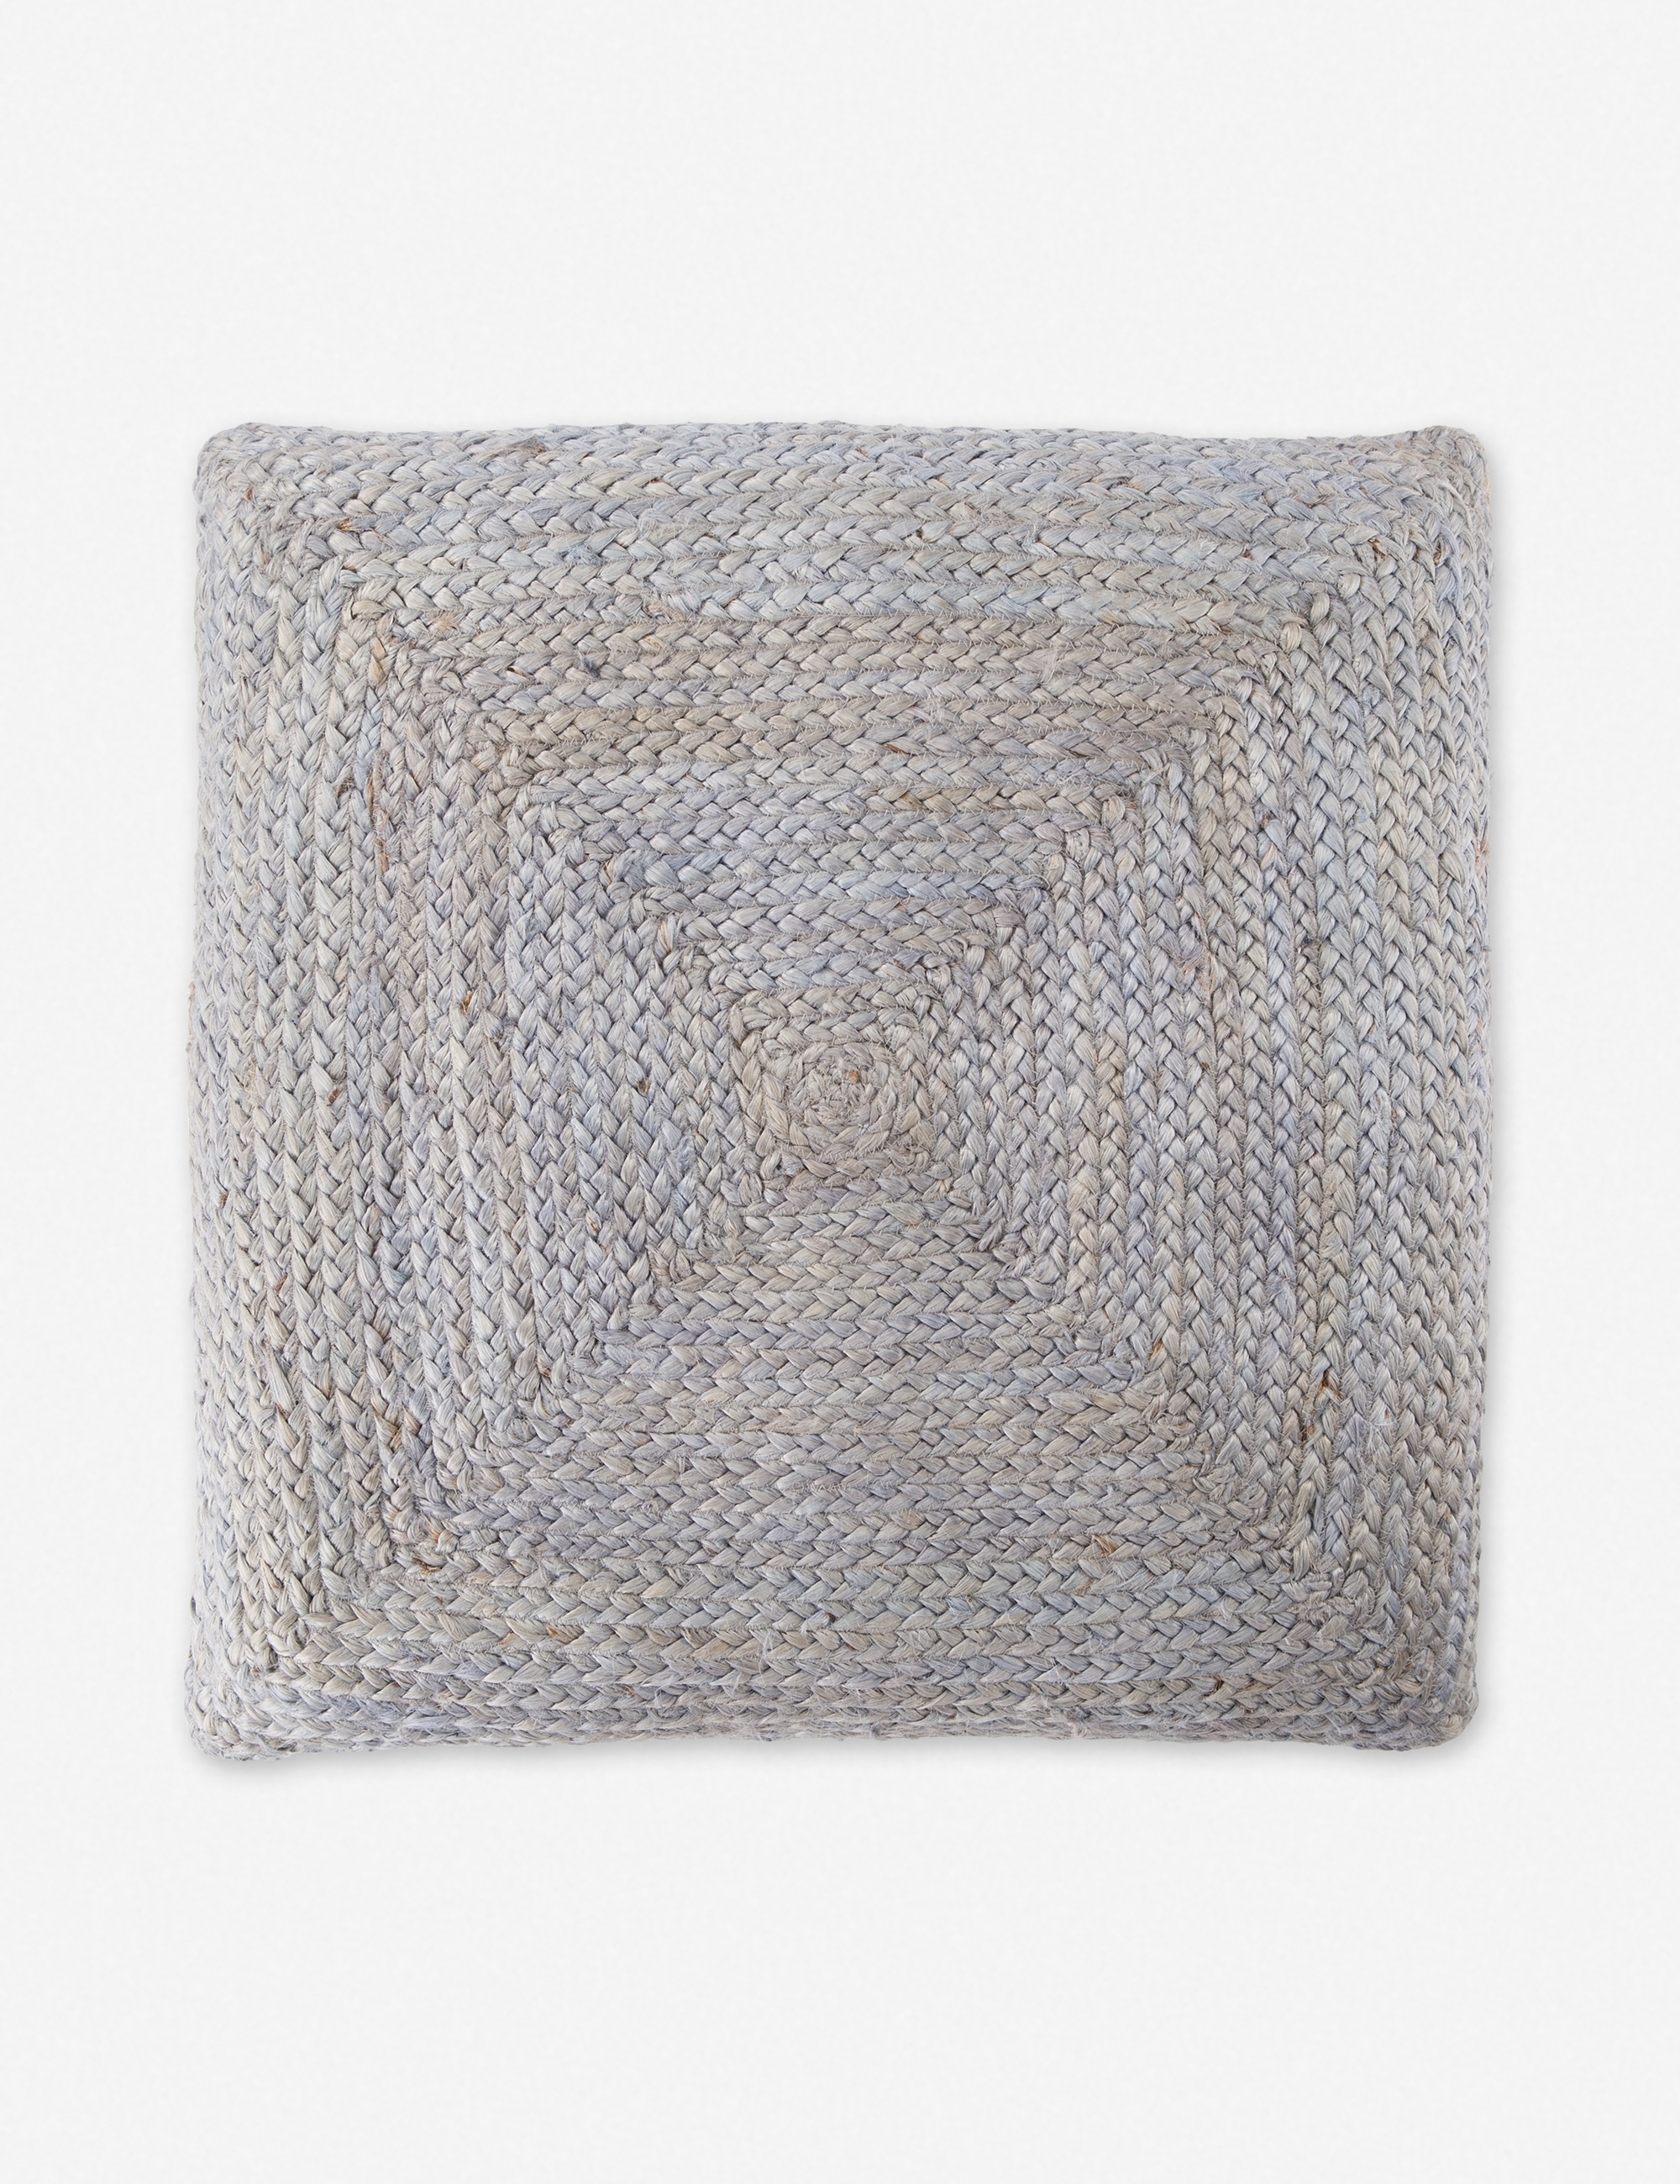 Candess Floor Pillow - Image 2